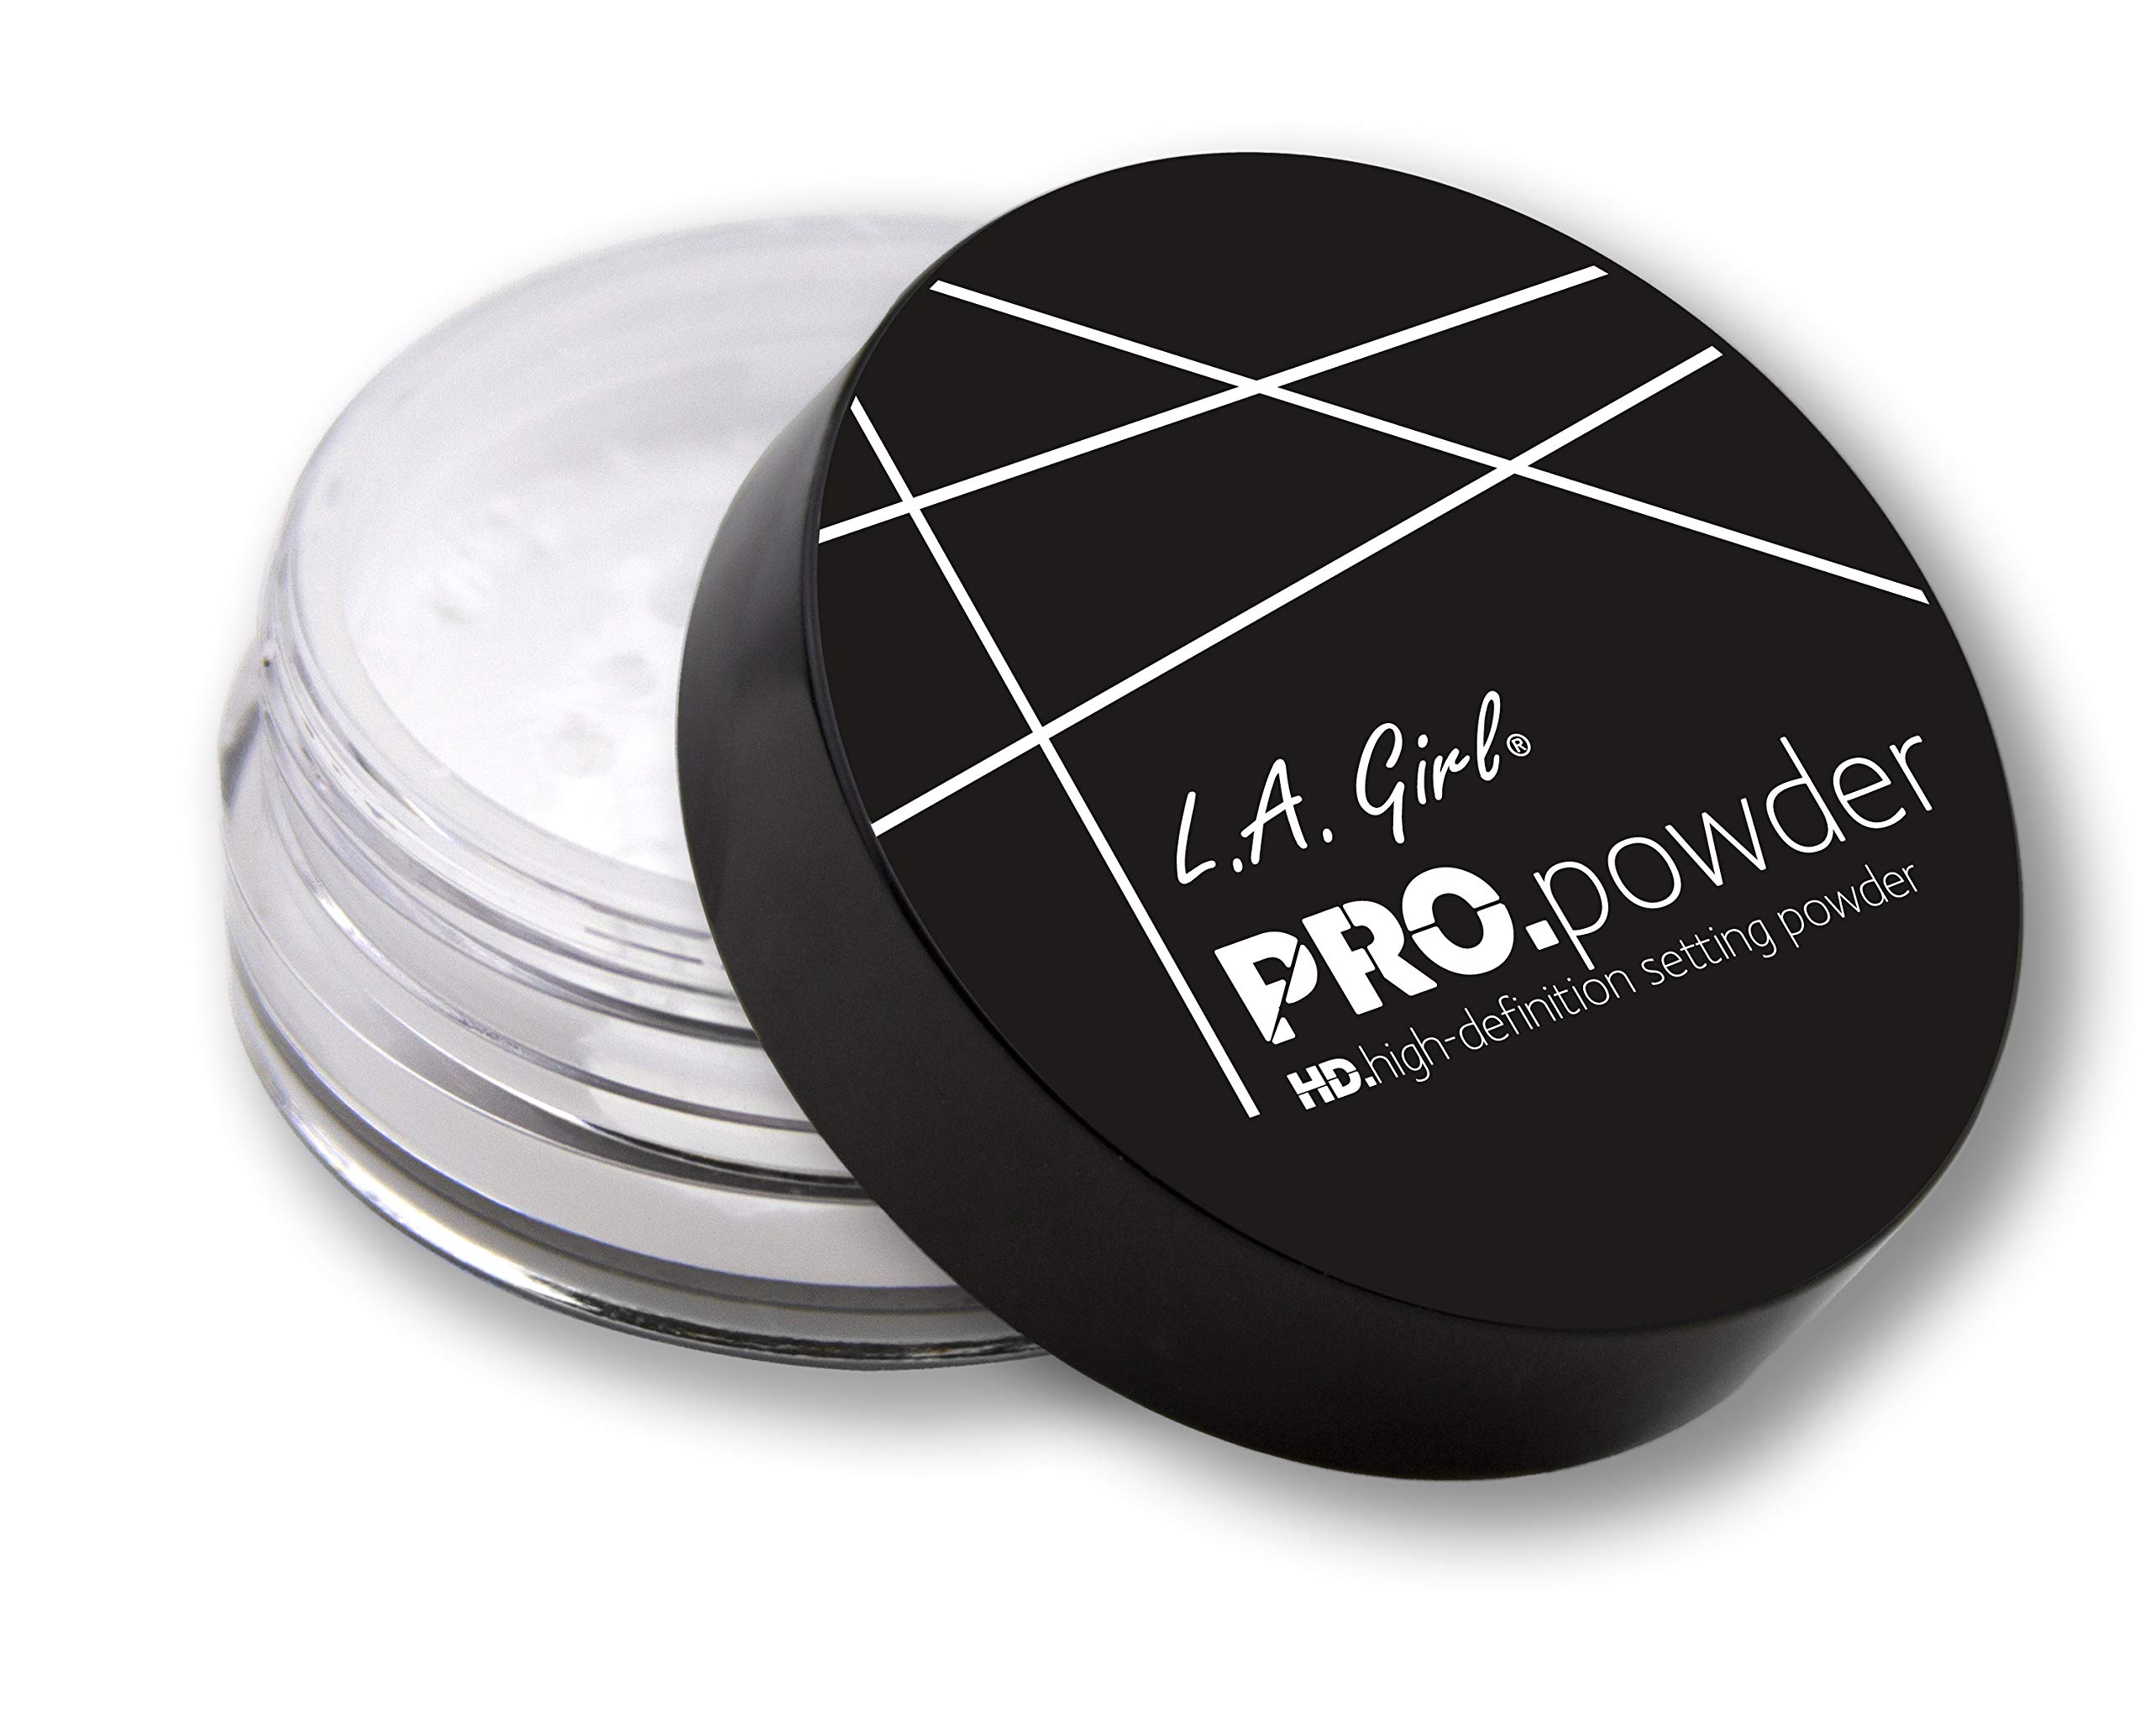 L.A. Girl Pro Powder High Definition Setting Powder Translucent Pack, Clear, 3 Count(Pack of 1)